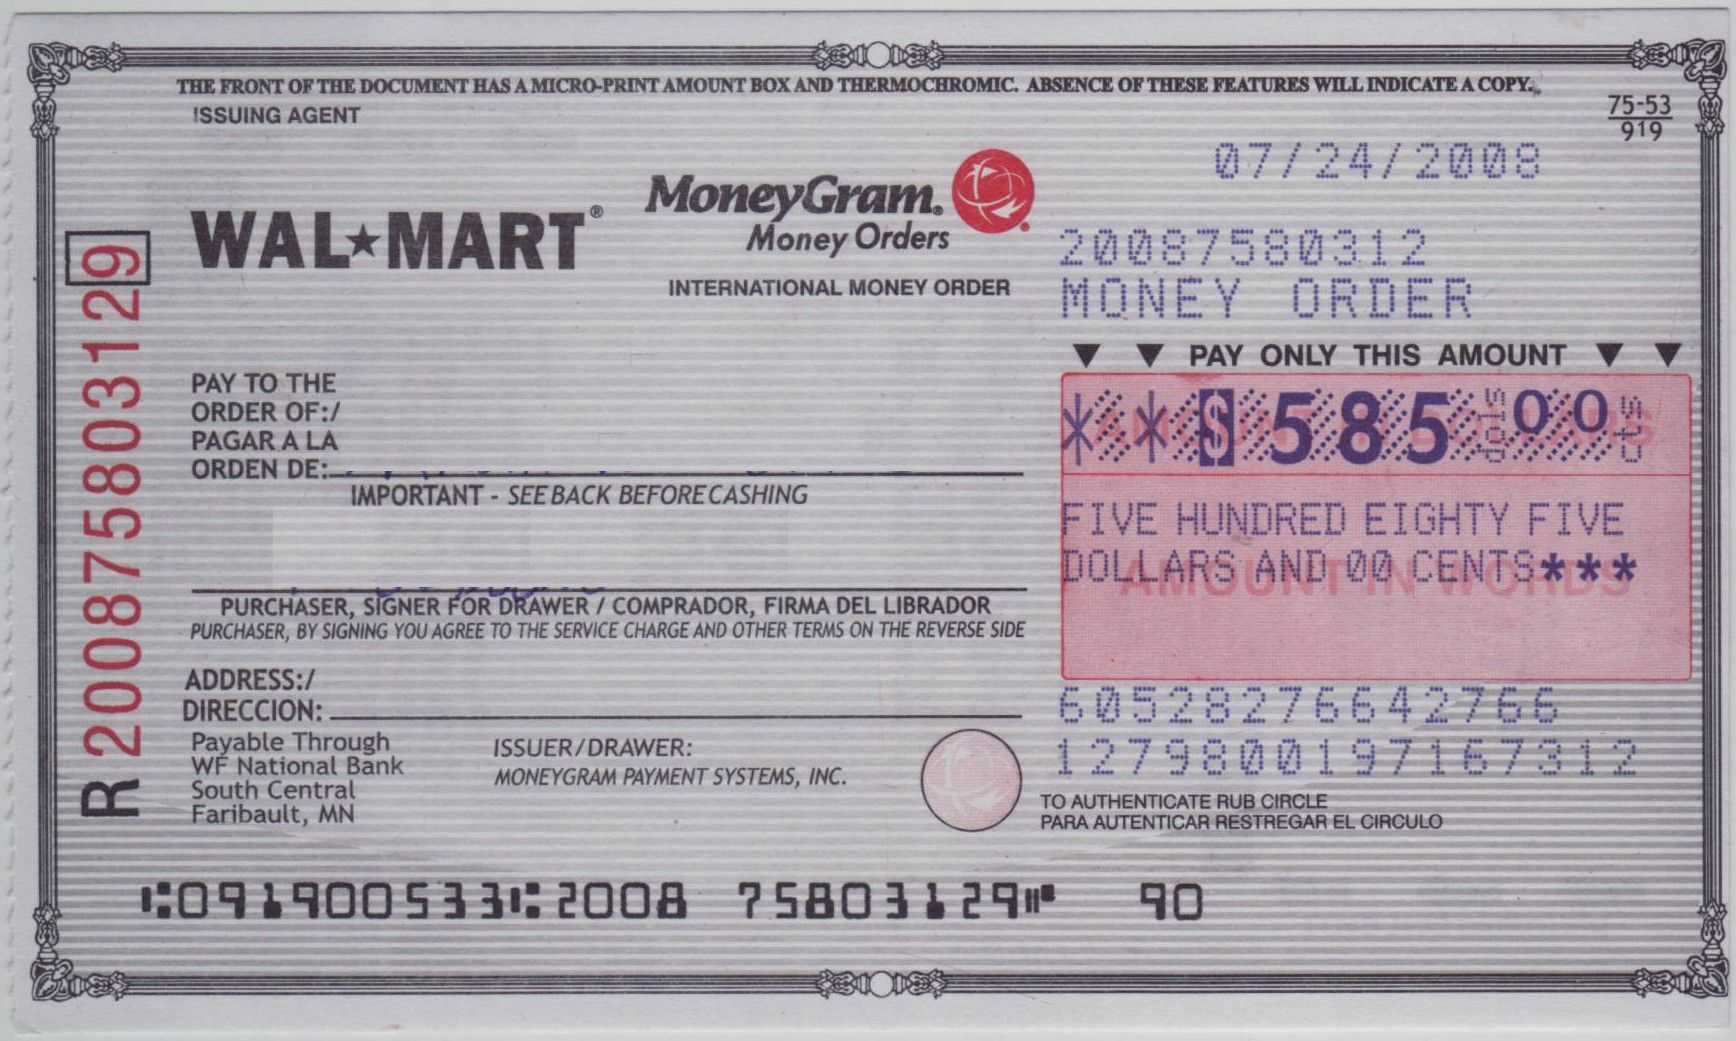 Blank Check Sample | How To Fill Out A Moneygram Money Order Throughout Blank Money Order Template